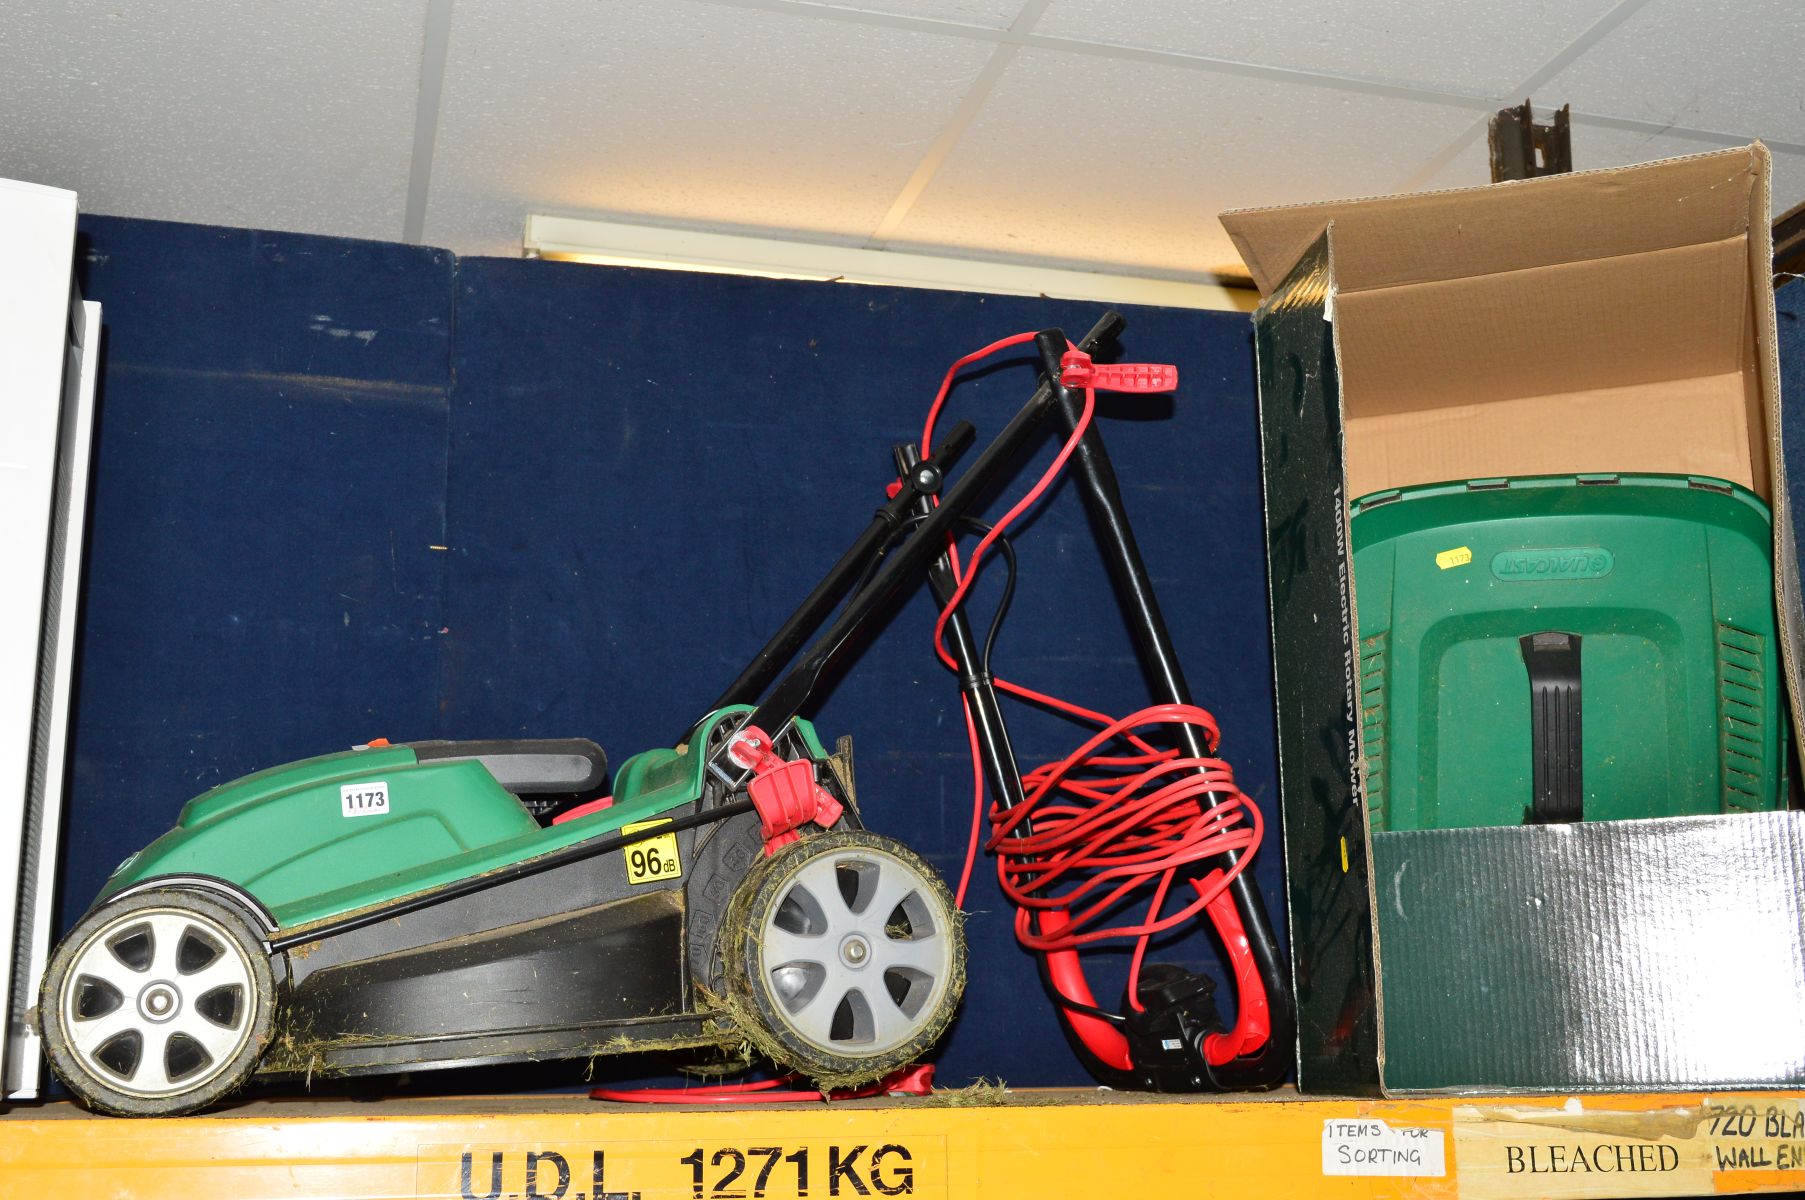 A QUALCAST ELECTRIC LAWN MOWER WITH GRASS BOX